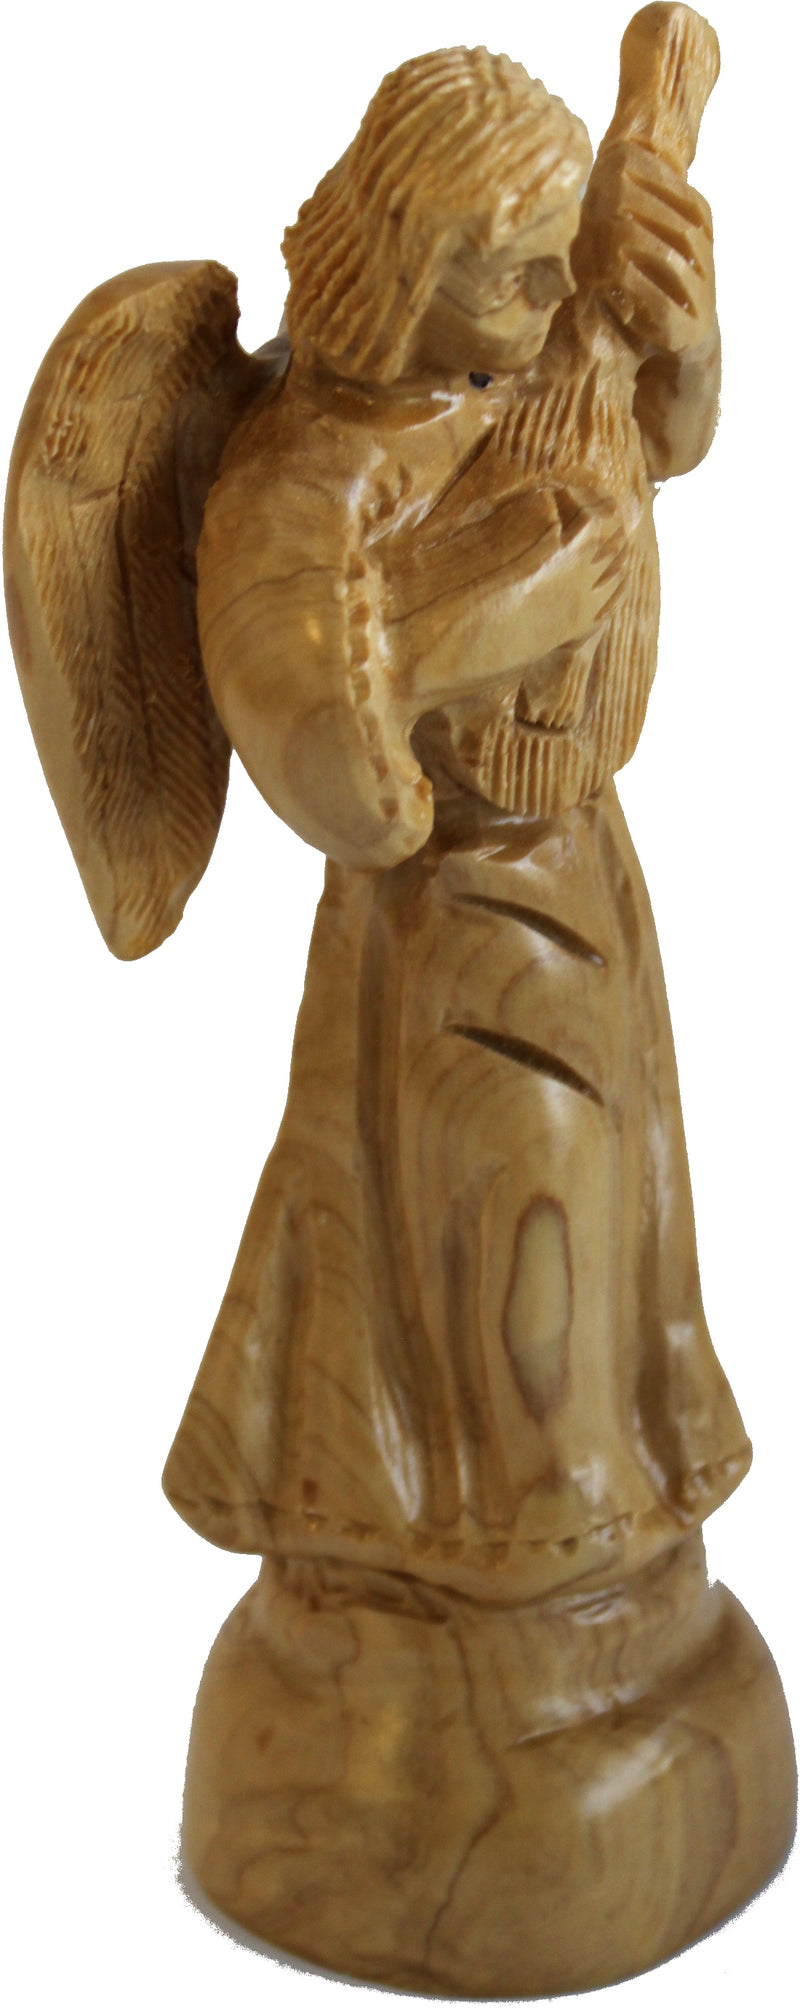 Angel playing music - carved in olive wood , carved faces and details style ( 17.5 cm or 7 Inches )